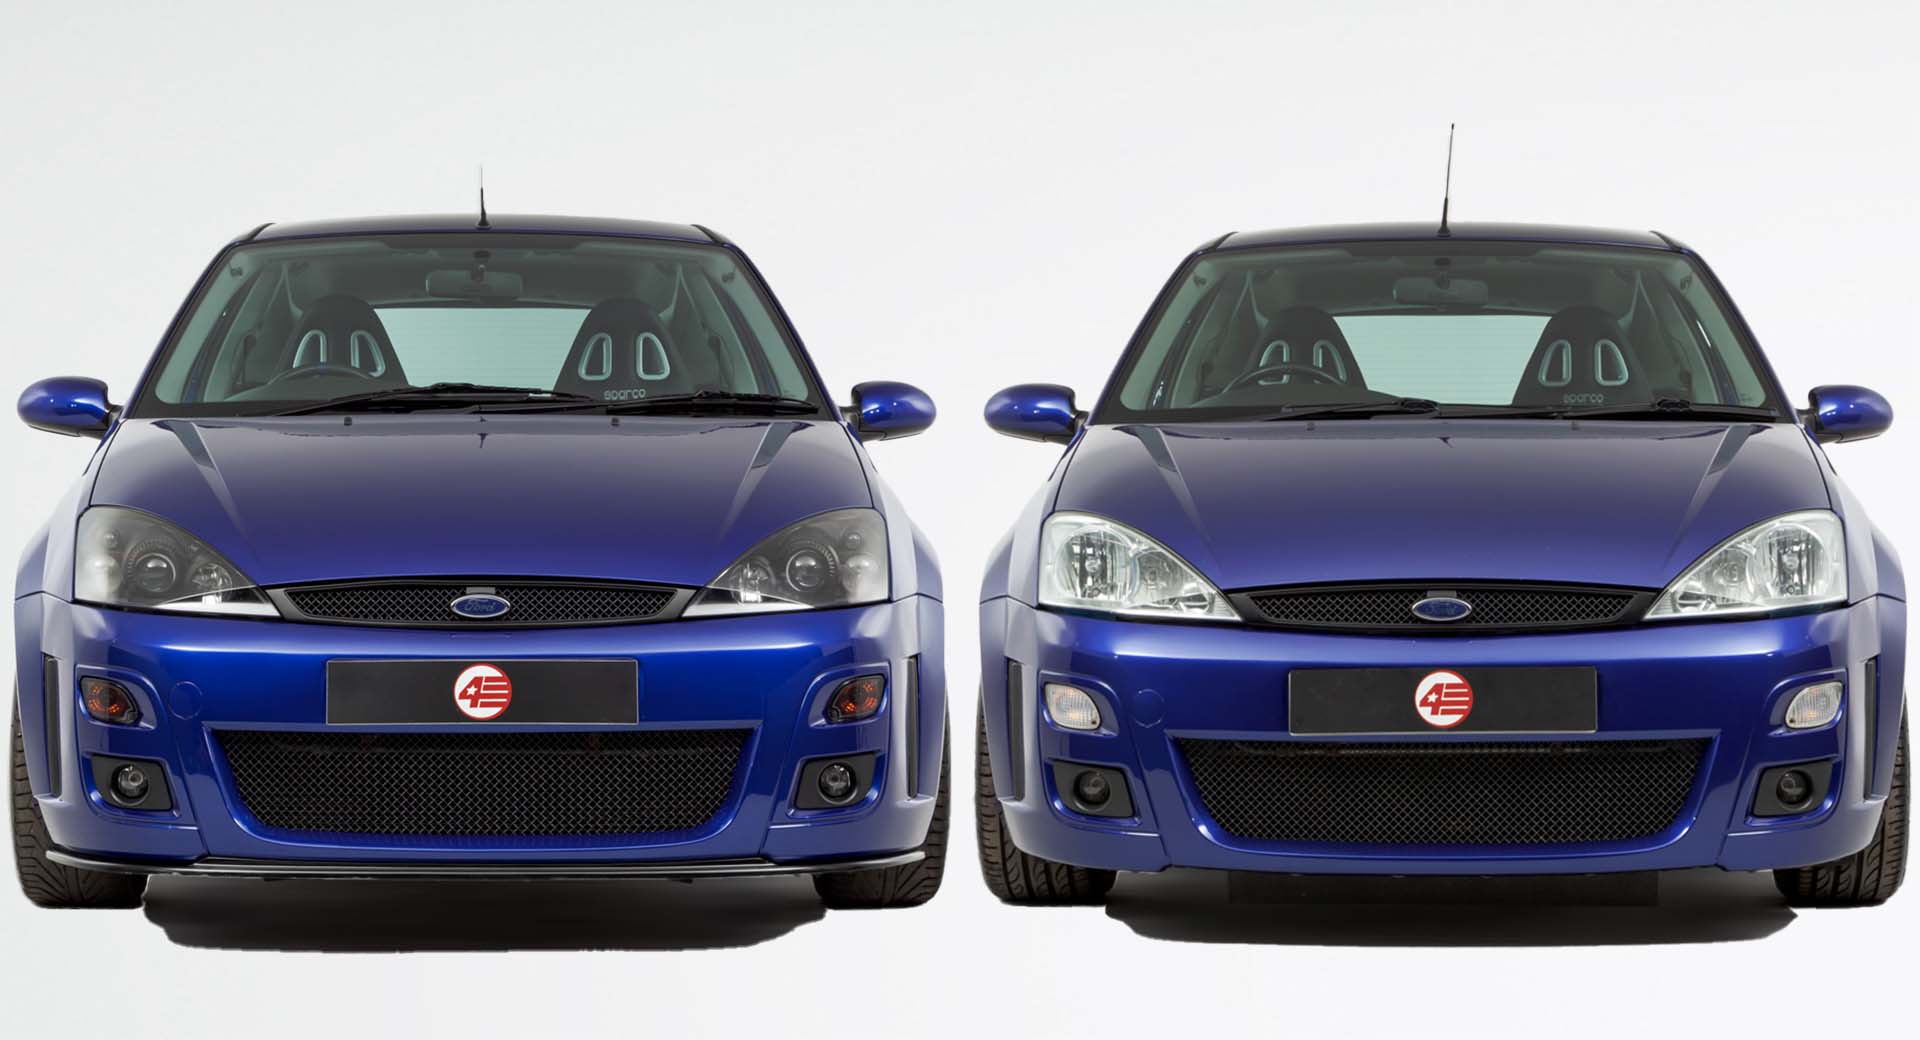 The Ford Focus RS On The Left Costs $25k/£19k More. Is It Worth It?